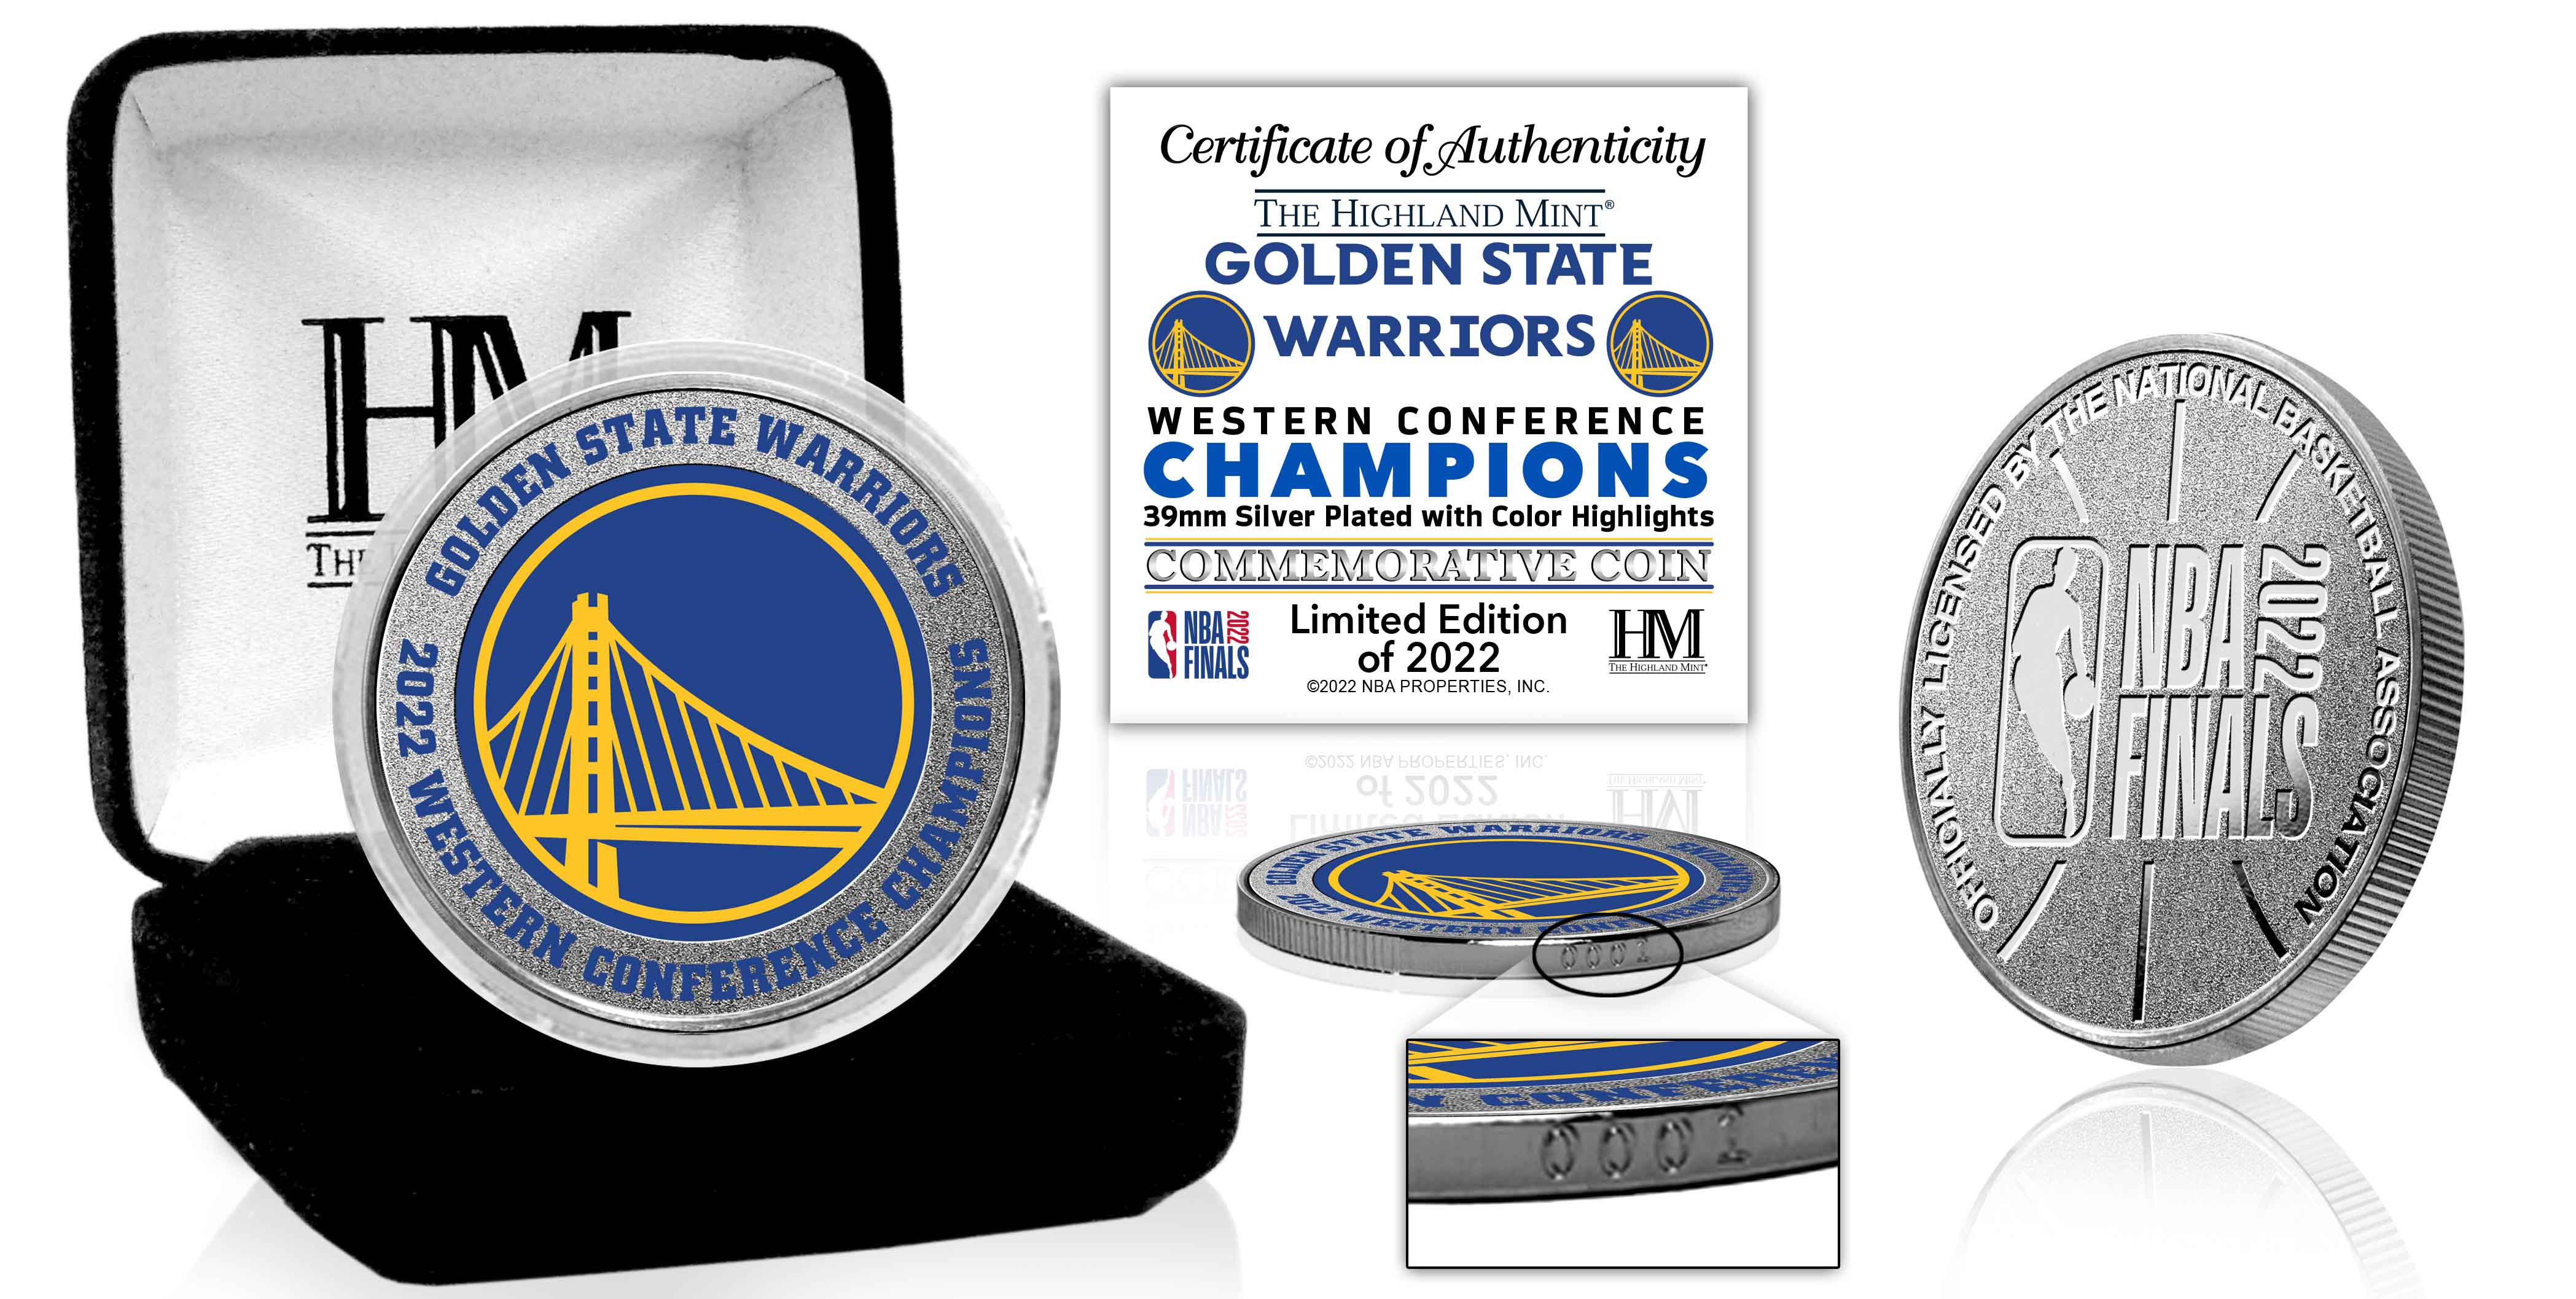 Golden State Warriors Western Conference Champions Color Silver Mint Coin